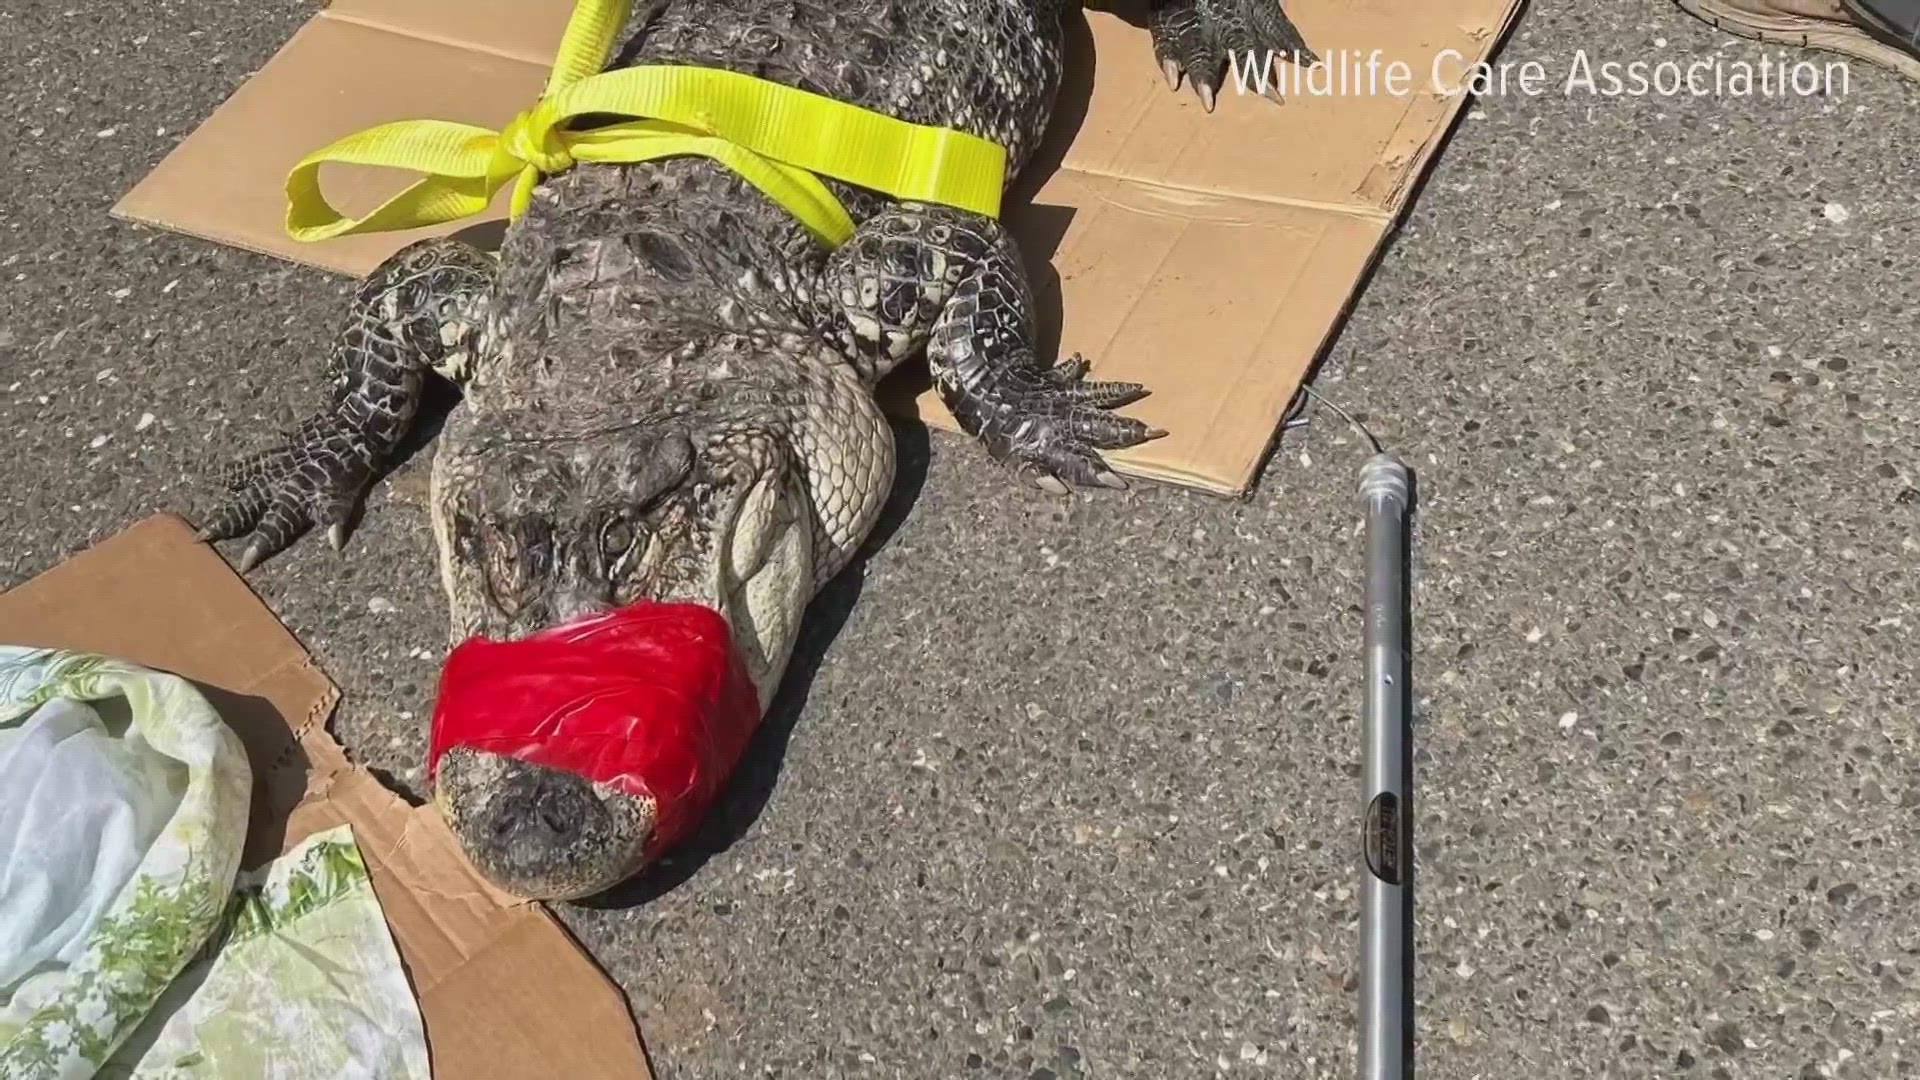 The Department of Fish and Wildlife have the alligator now, and are trying to figure out where it came from.